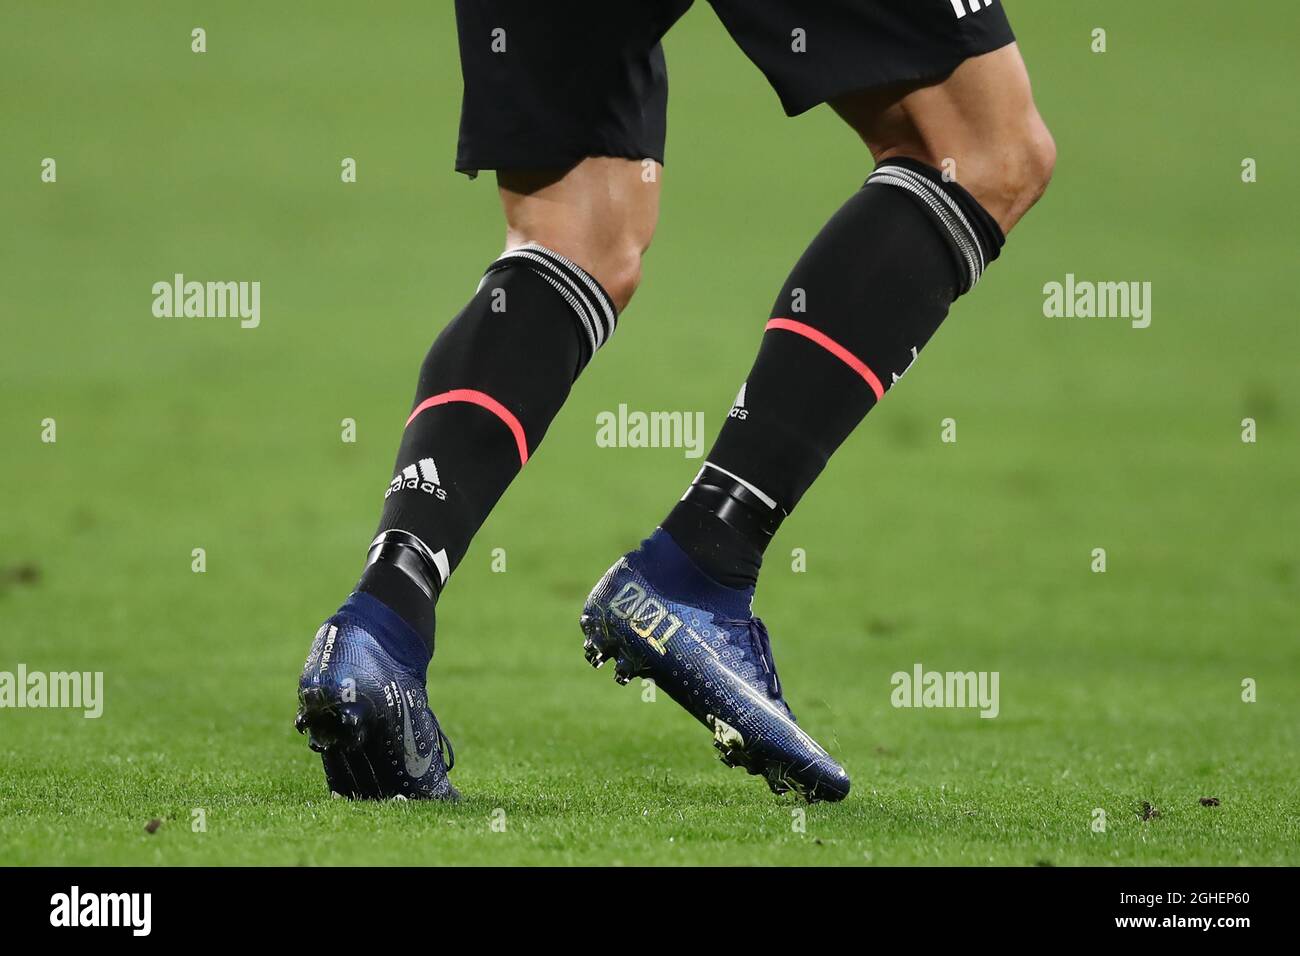 Cristiano Ronaldo of Juventus models a new version of Nike Mercurial during  the UEFA Champions League match at Juventus Stadium, Turin. Picture date:  1st October 2019. Picture credit should read: Jonathan Moscrop/Sportimage